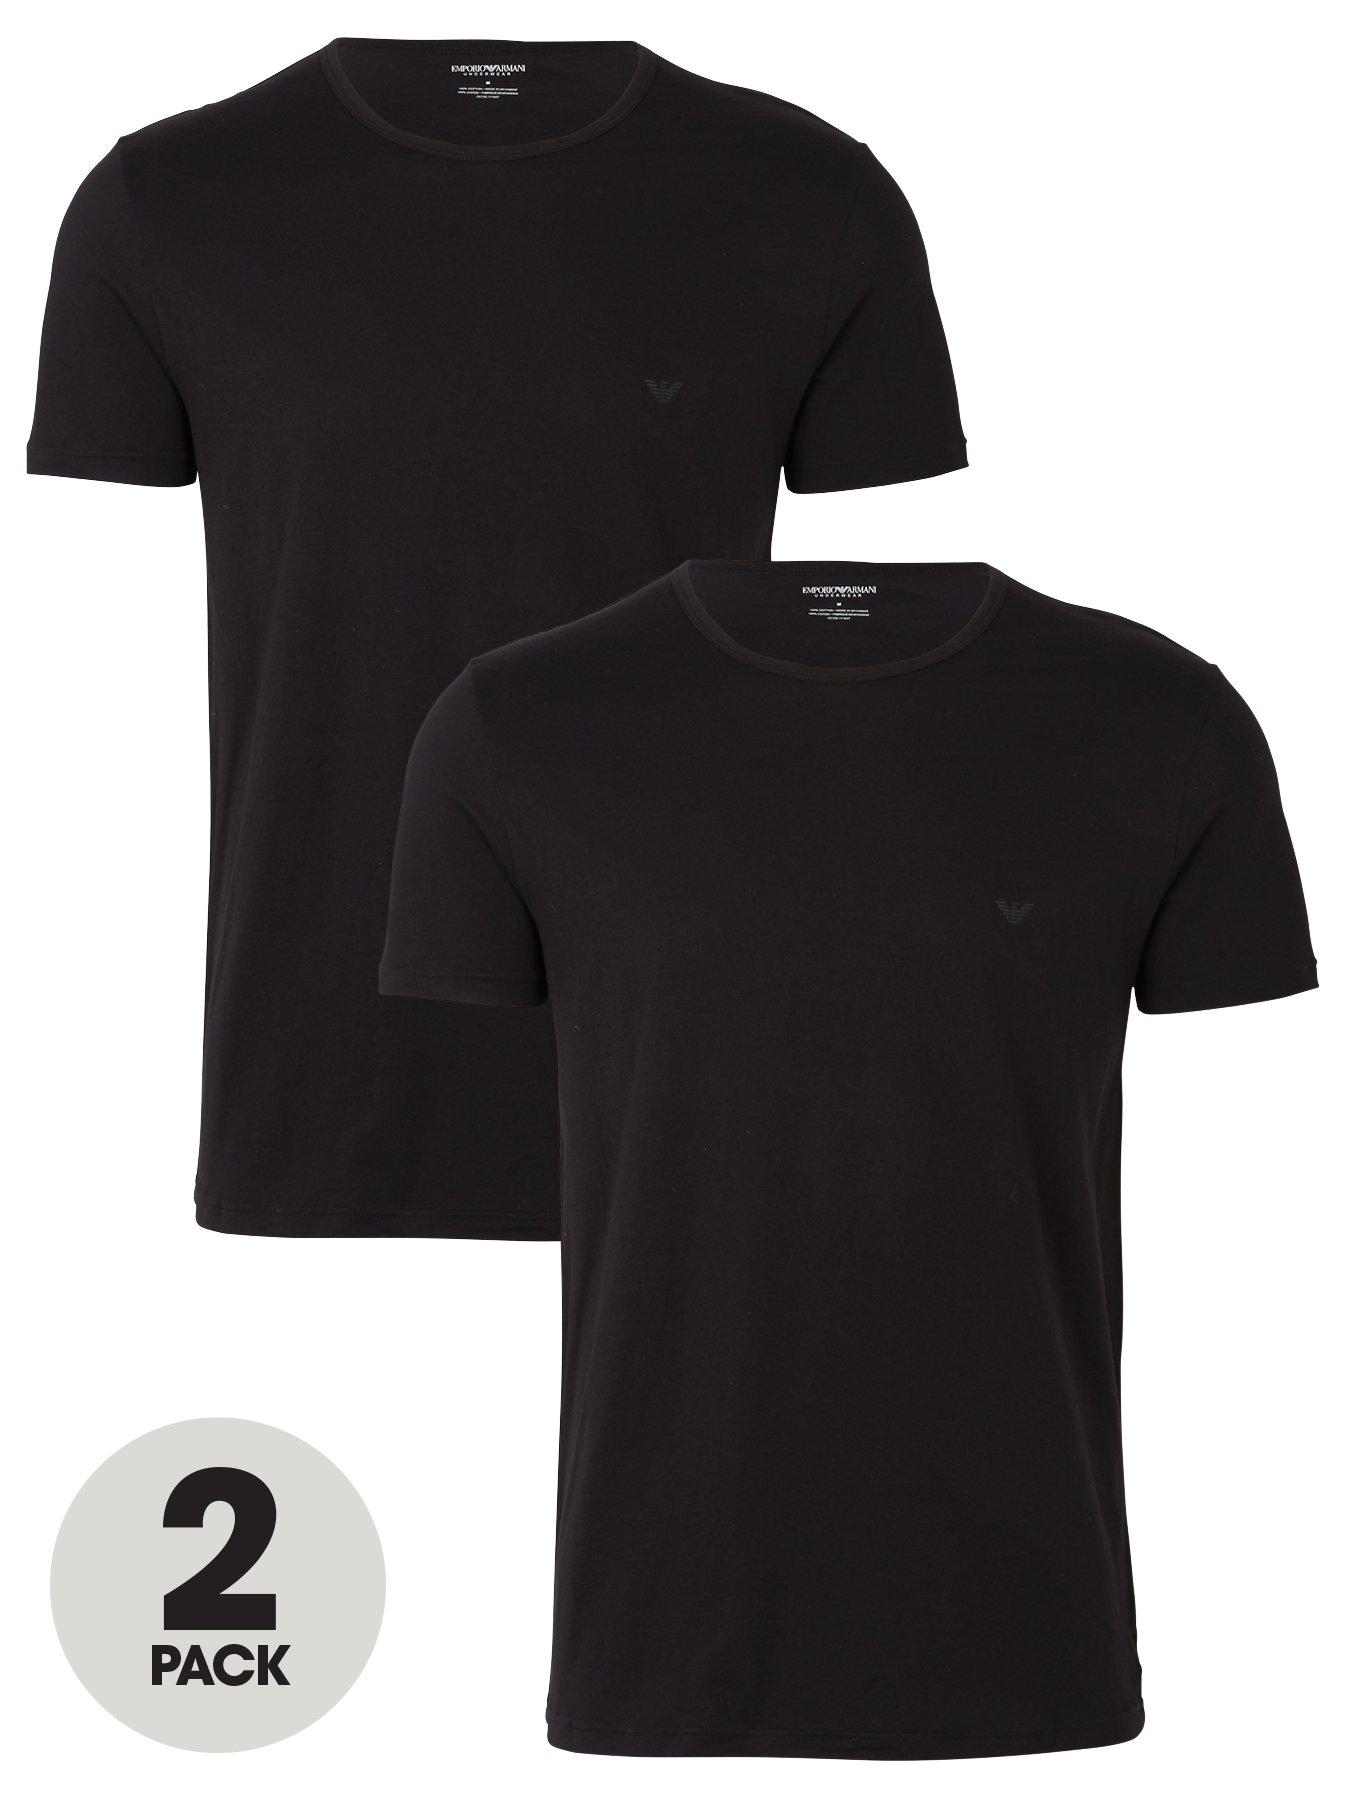  Two Pack Cotton Regular Fit T-Shirts - Black